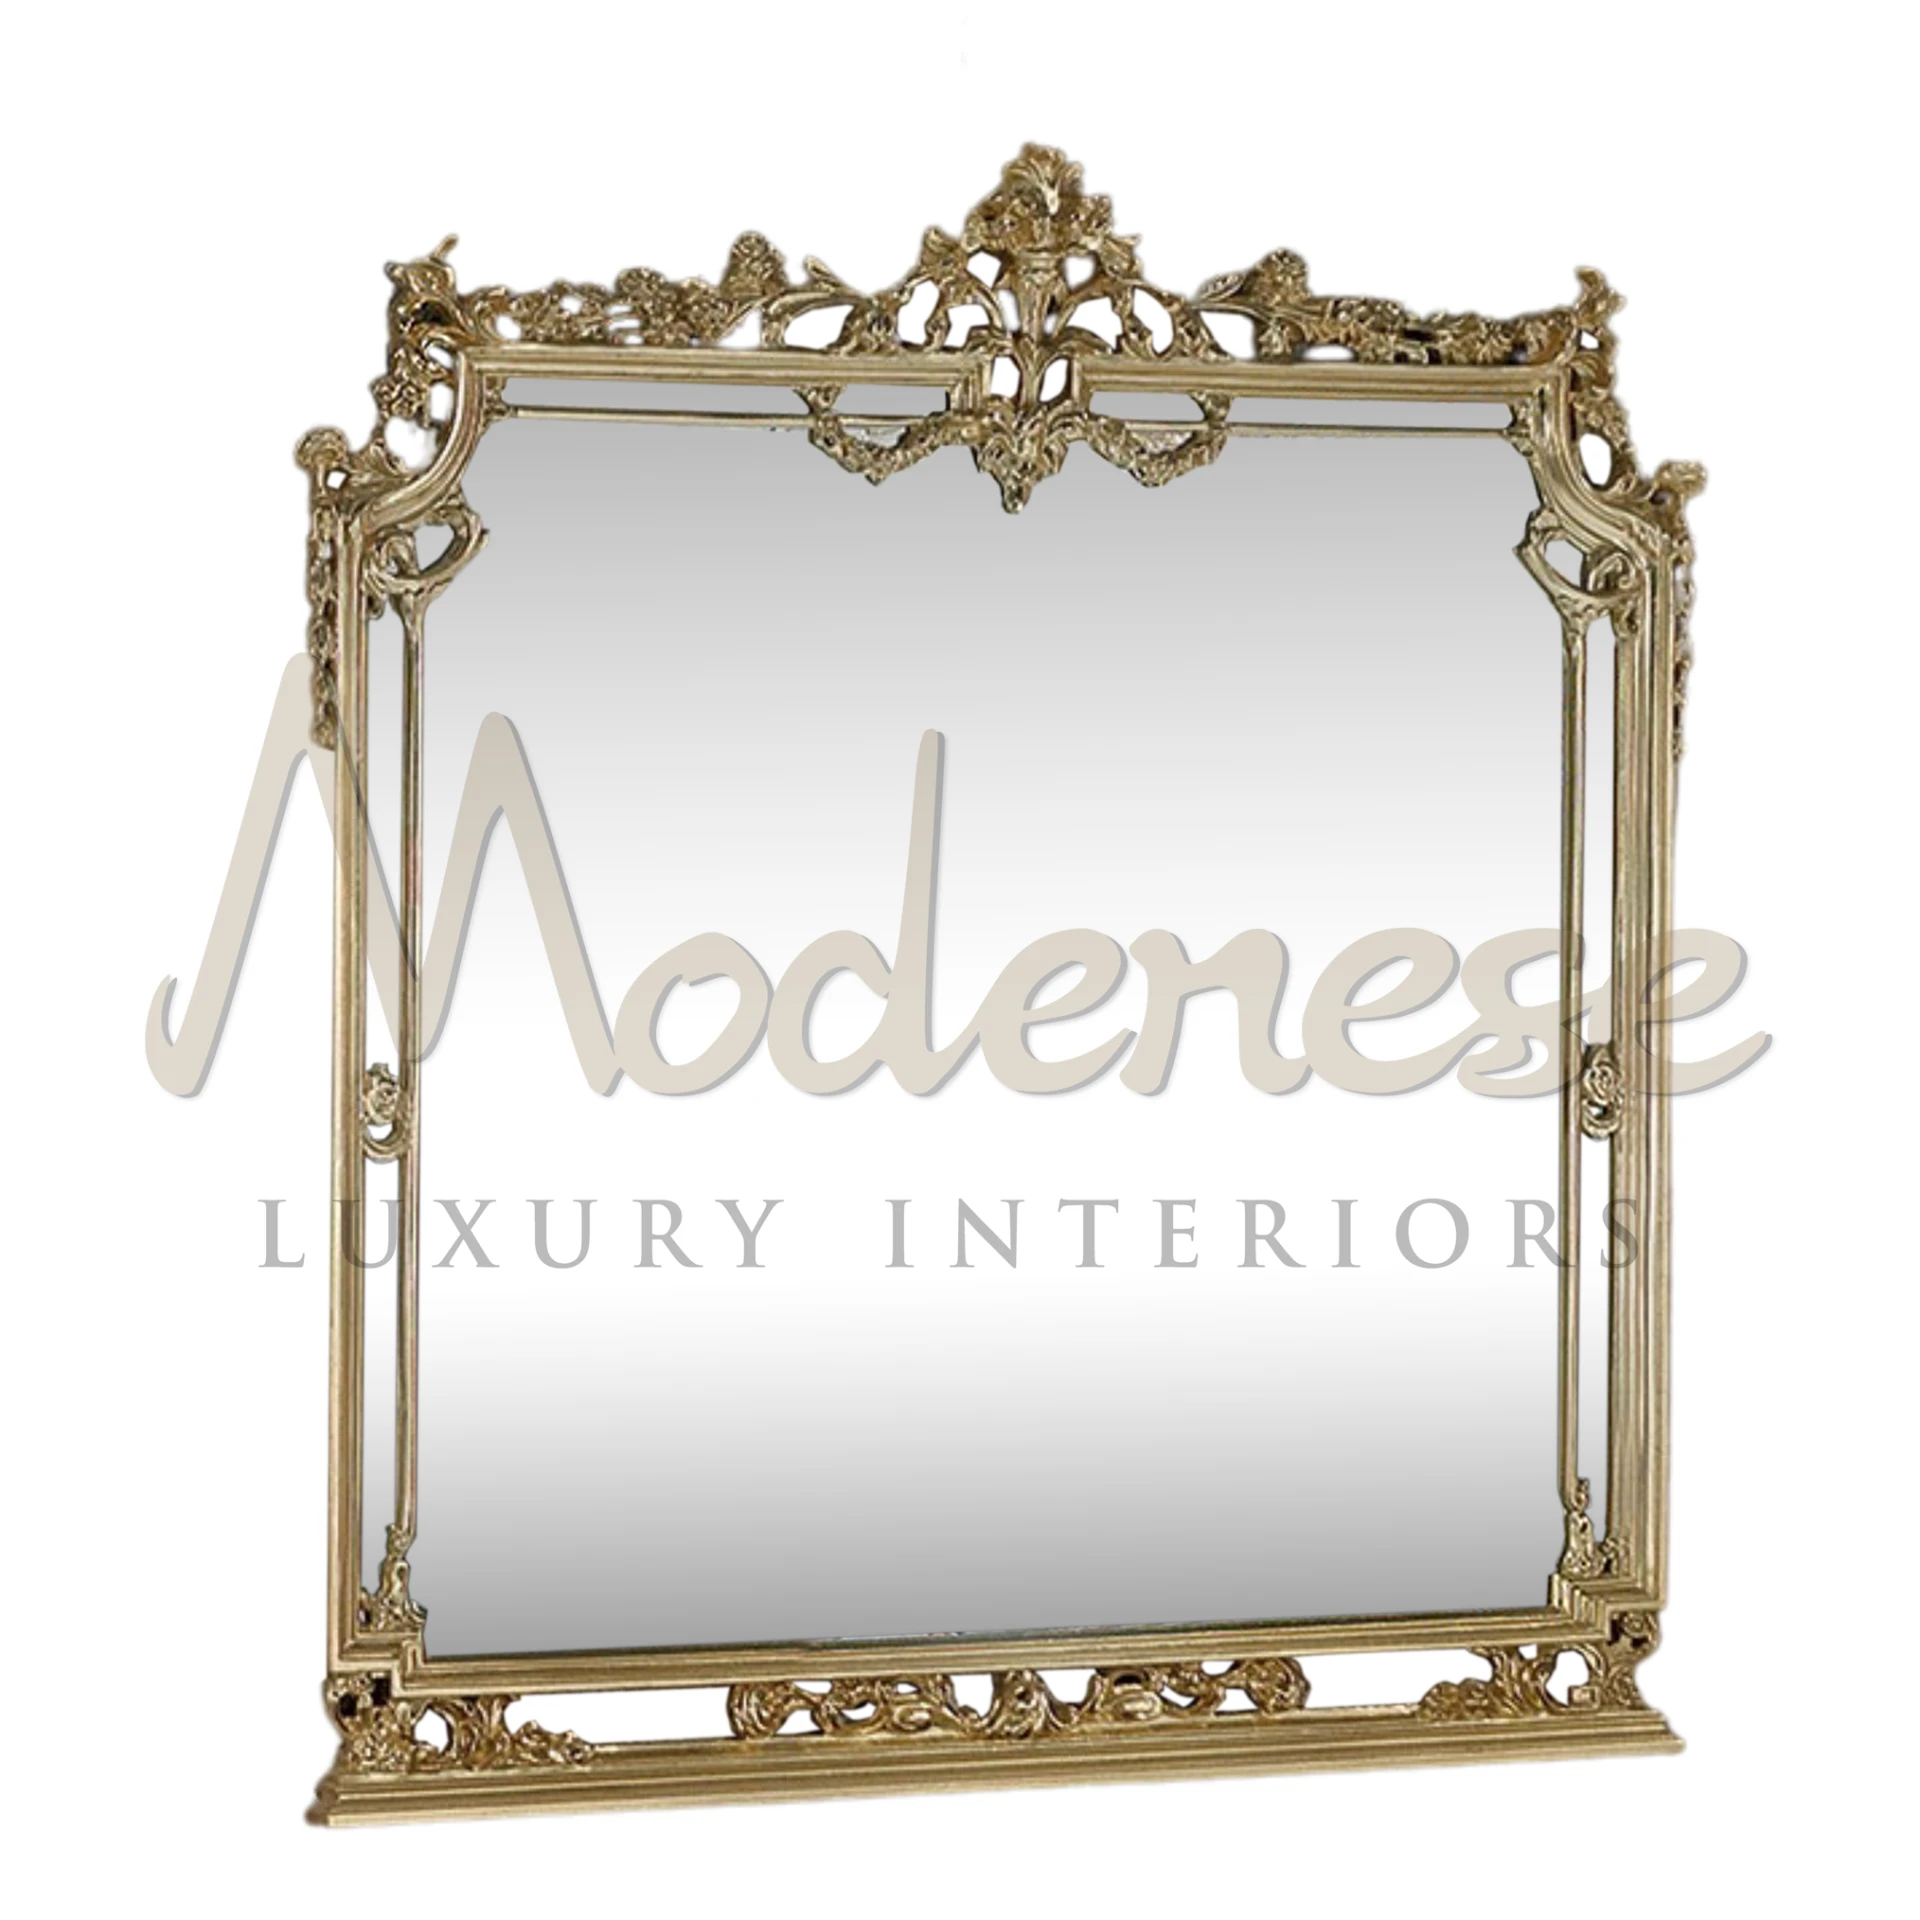 Italian Design Gold Leaf Mirror, a masterpiece of minimalist luxury, perfect for enhancing sophisticated interior design.